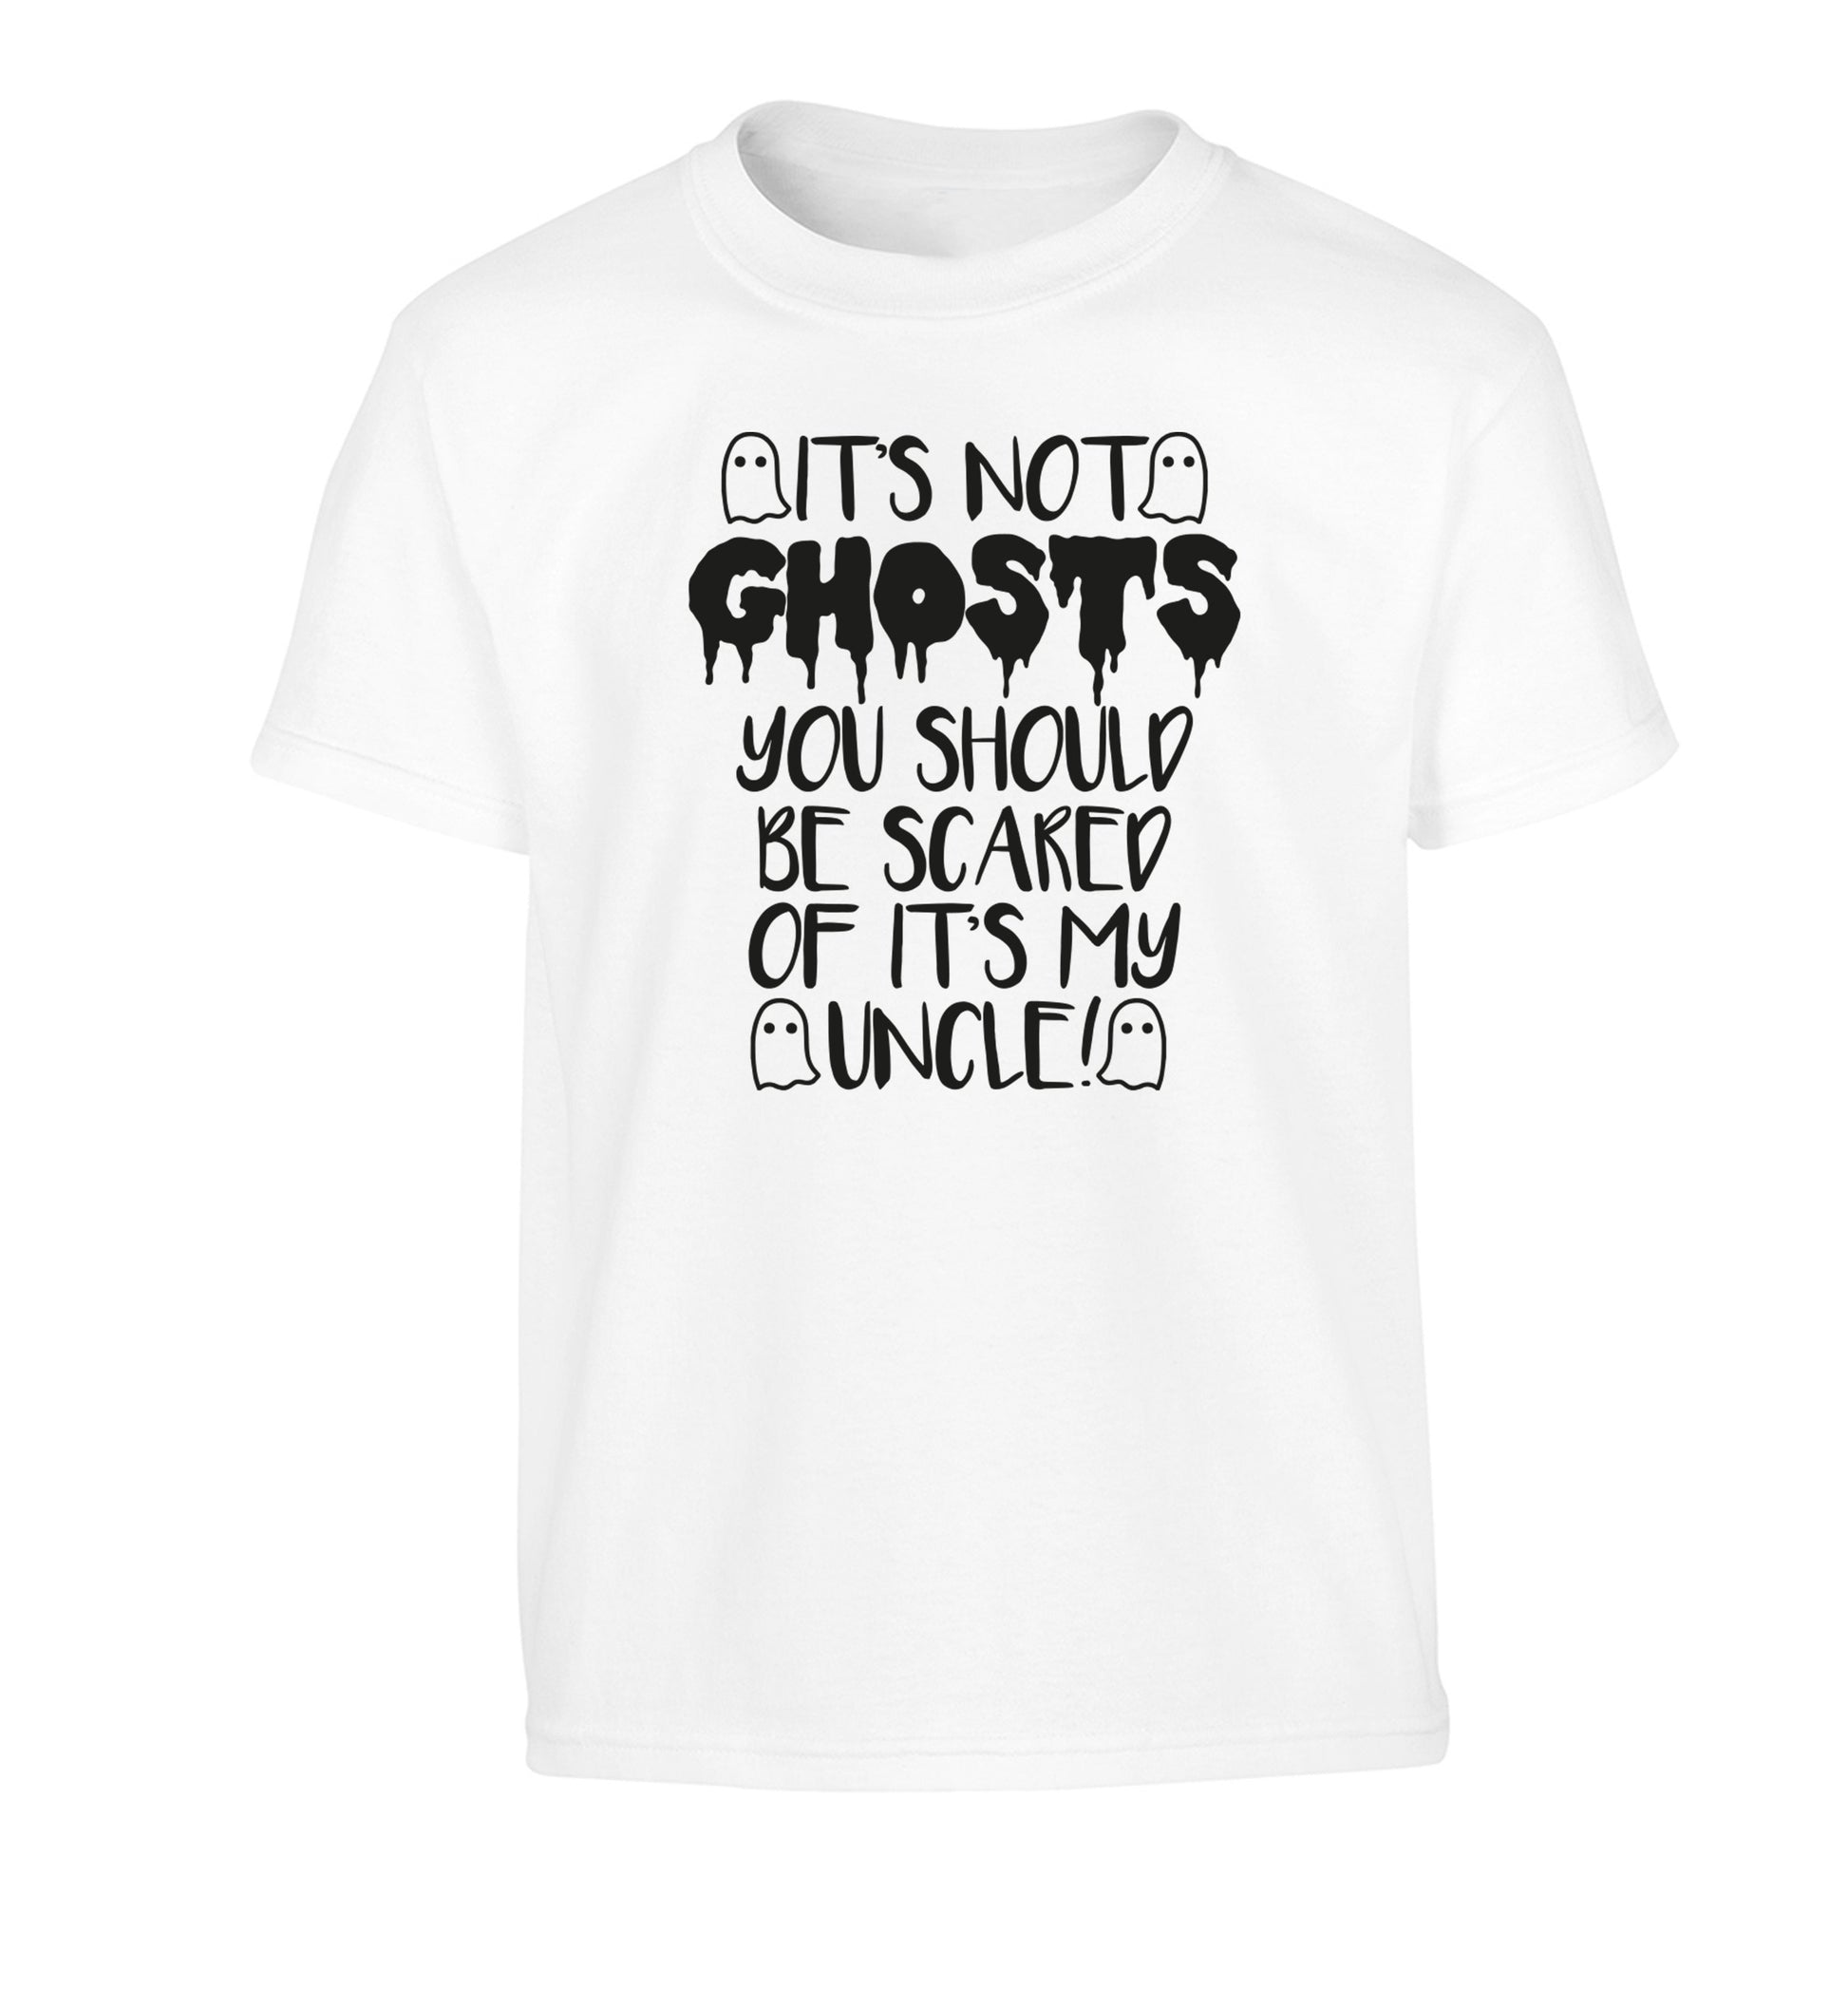 It's not ghosts you should be scared of it's my uncle! Children's white Tshirt 12-14 Years